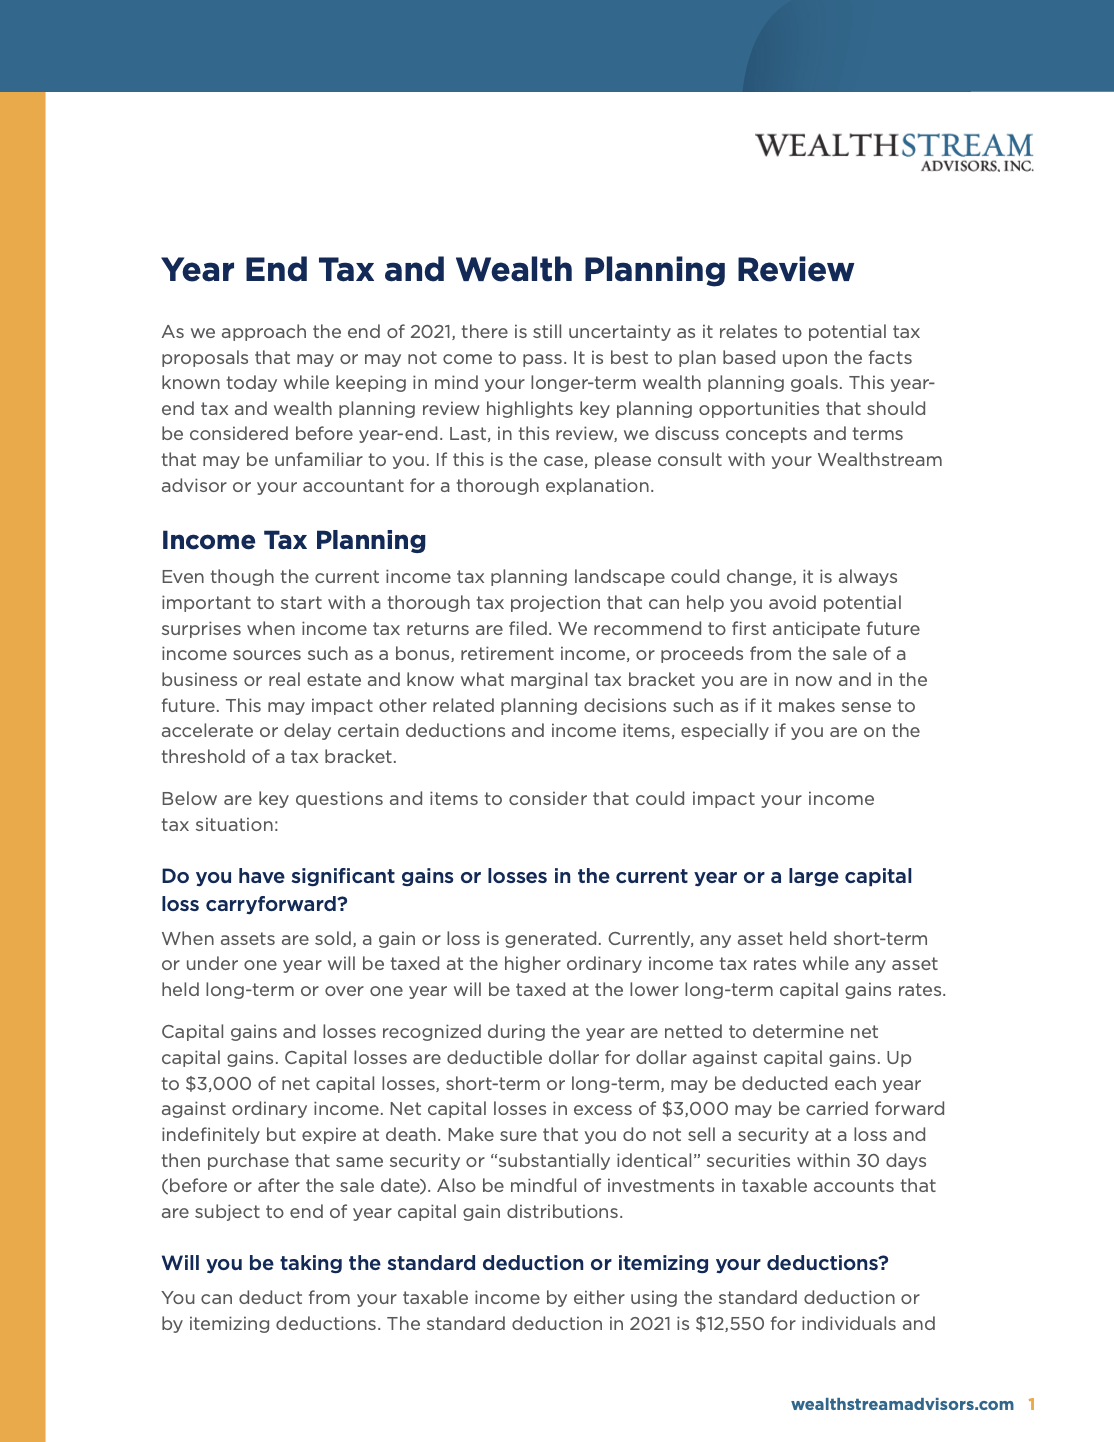 Year End Tax and Wealth Planning Review_LP